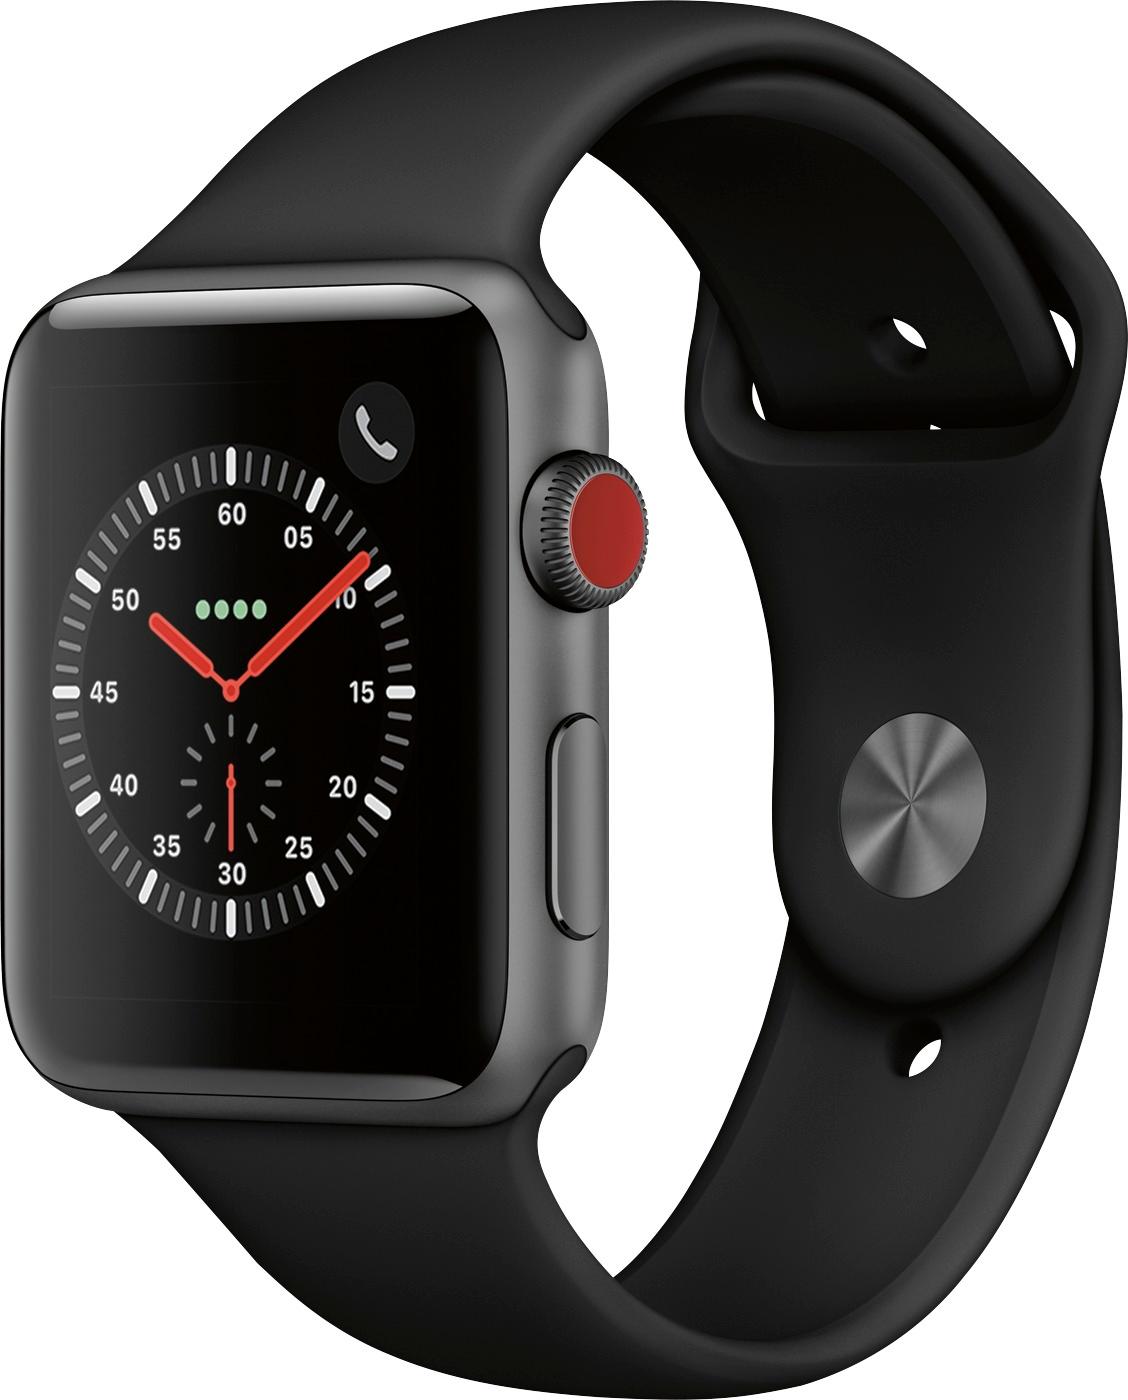 Apple Watch Series 3 (GPS + Cellular), 42mm Space Gray